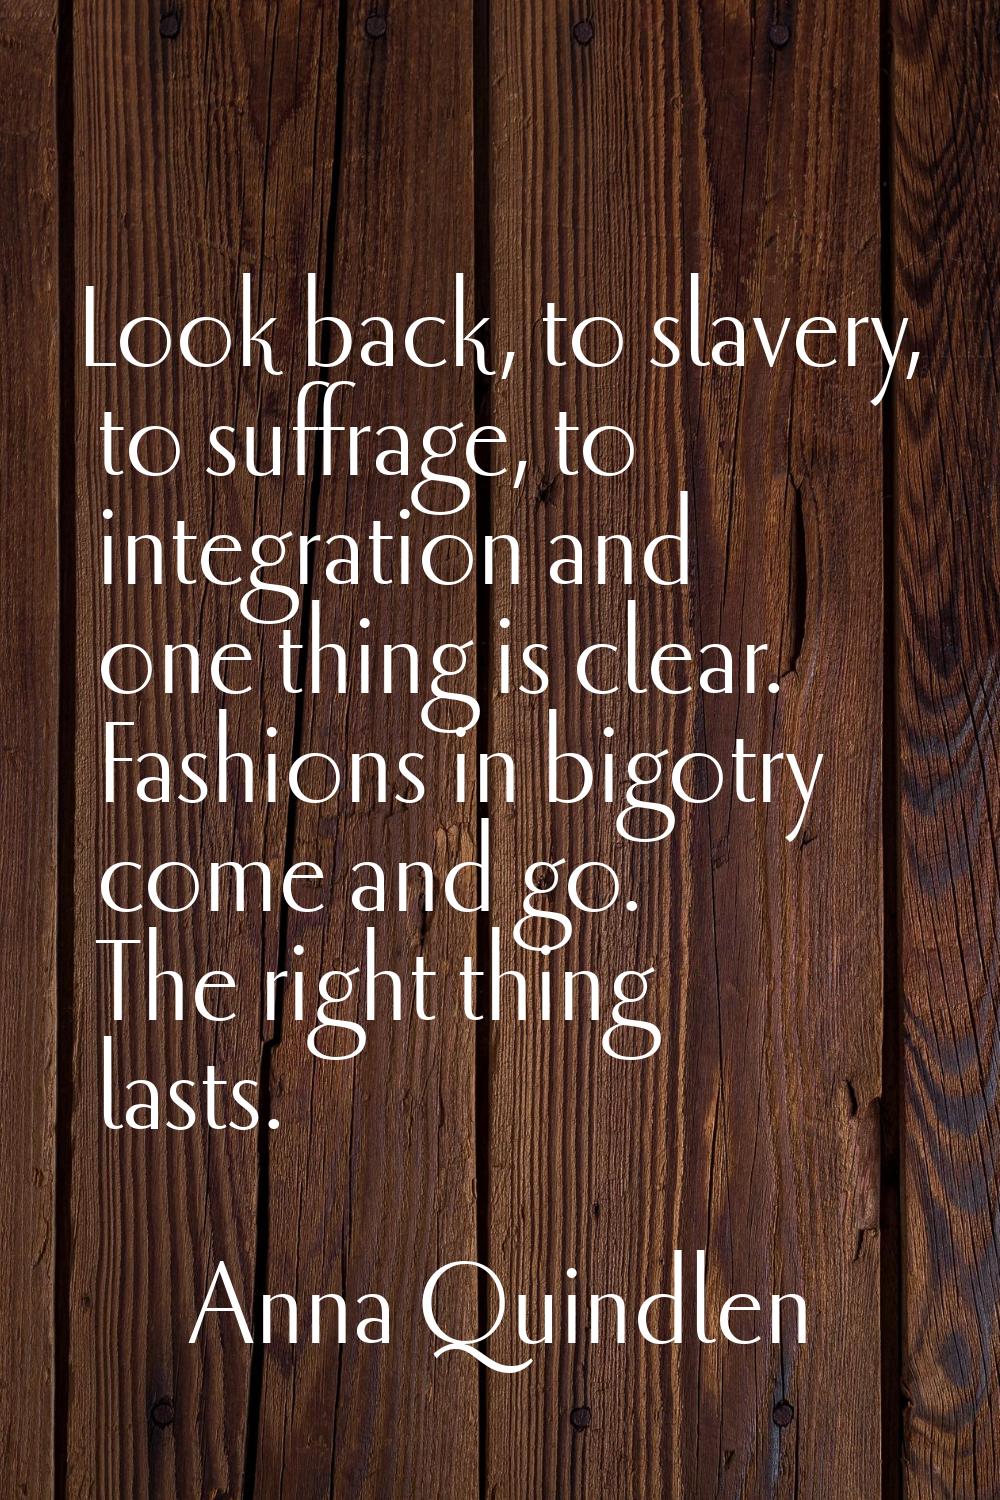 Look back, to slavery, to suffrage, to integration and one thing is clear. Fashions in bigotry come